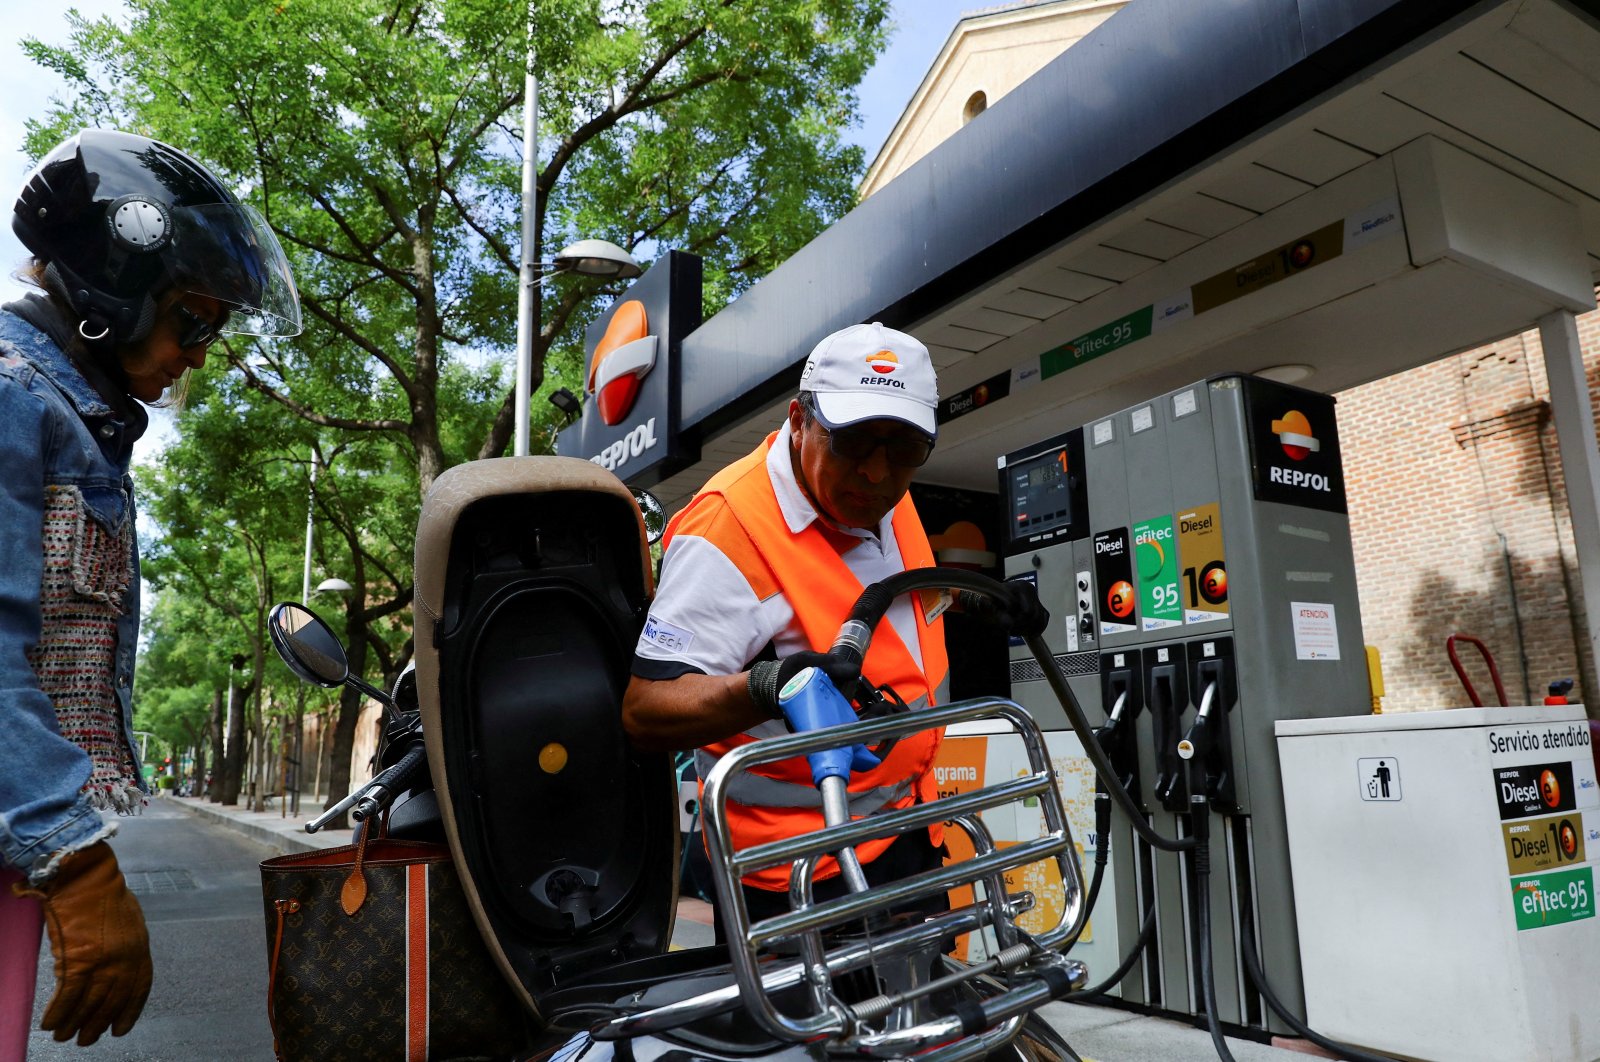 A worker prepares to pump gas into a car at a Repsol gas station in Madrid, Spain, Sept. 7, 2022. (Reuters Photo)